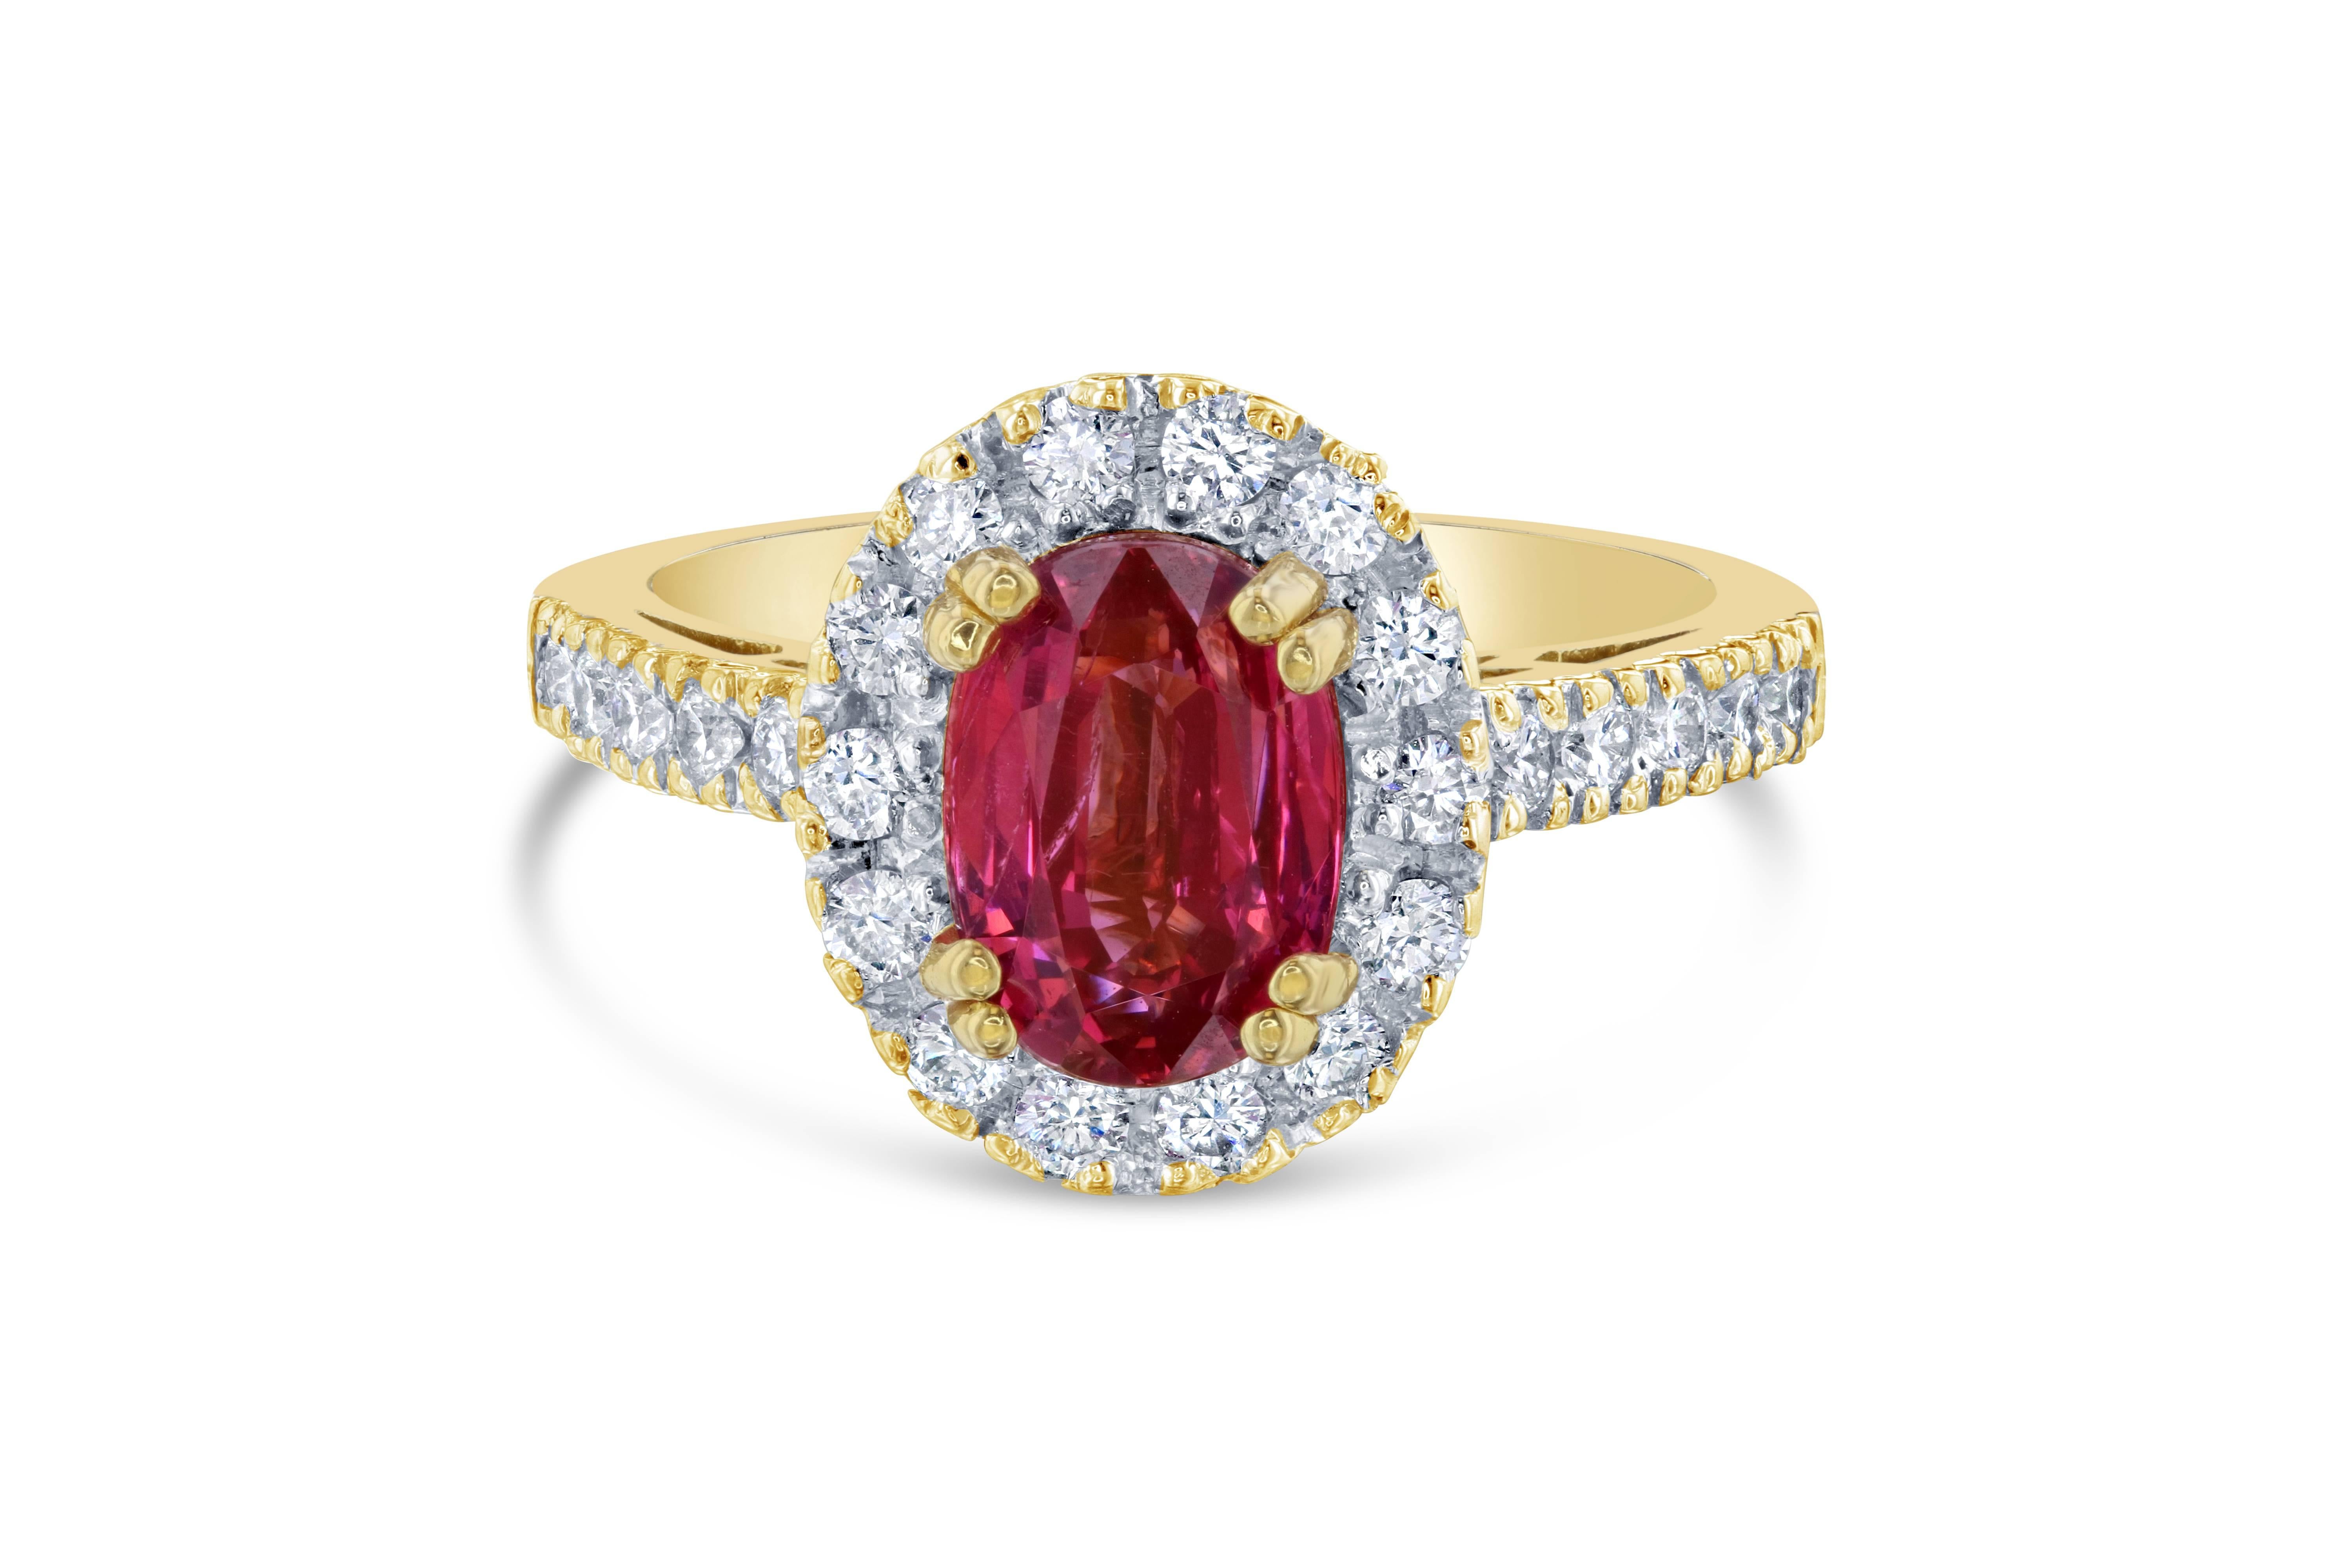 Calling all Spinel Lovers! A Beautiful Halo Natural Spinel and Diamond Ring that can be worn as a traditional cocktail ring, engagement ring or simply an everyday ring! 
The Spinel is natural and weighs 2.37 Carats and is surrounded by 25 Round Cut